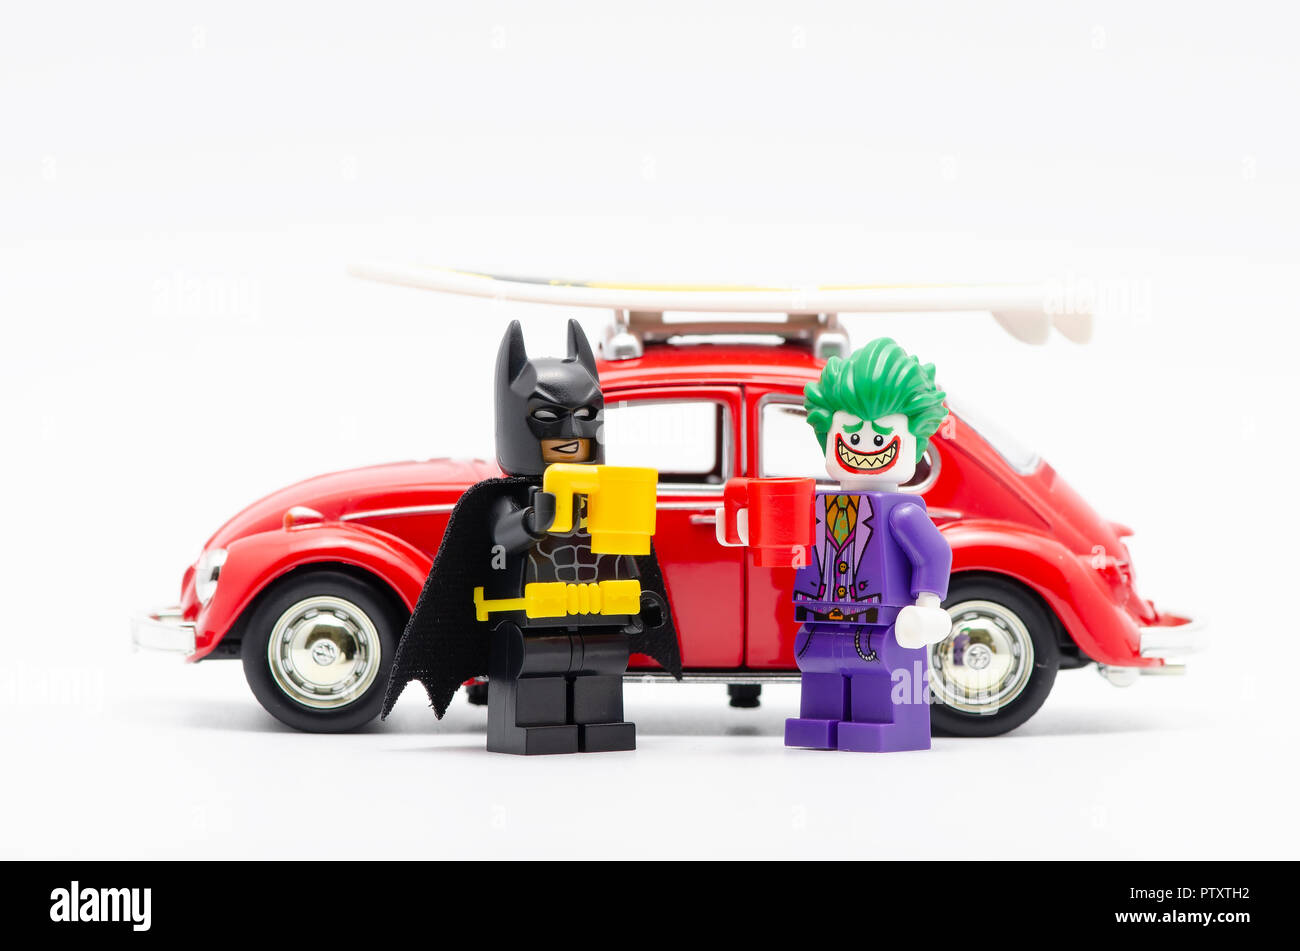 lego batman and joker drinking with volkswagen car behind them Stock Photo  - Alamy